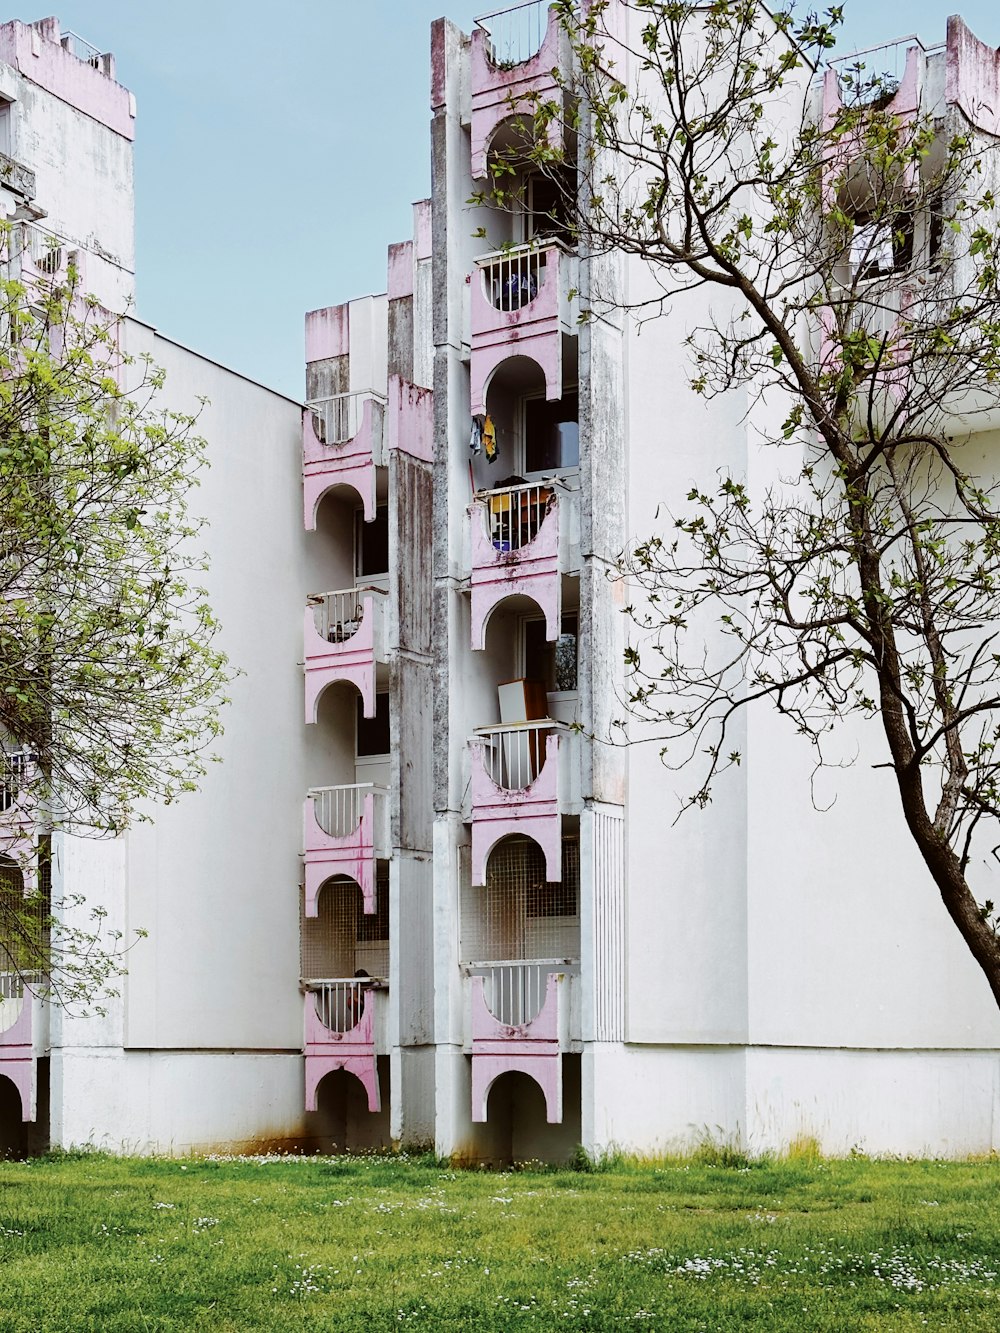 a tall white building with pink balconies